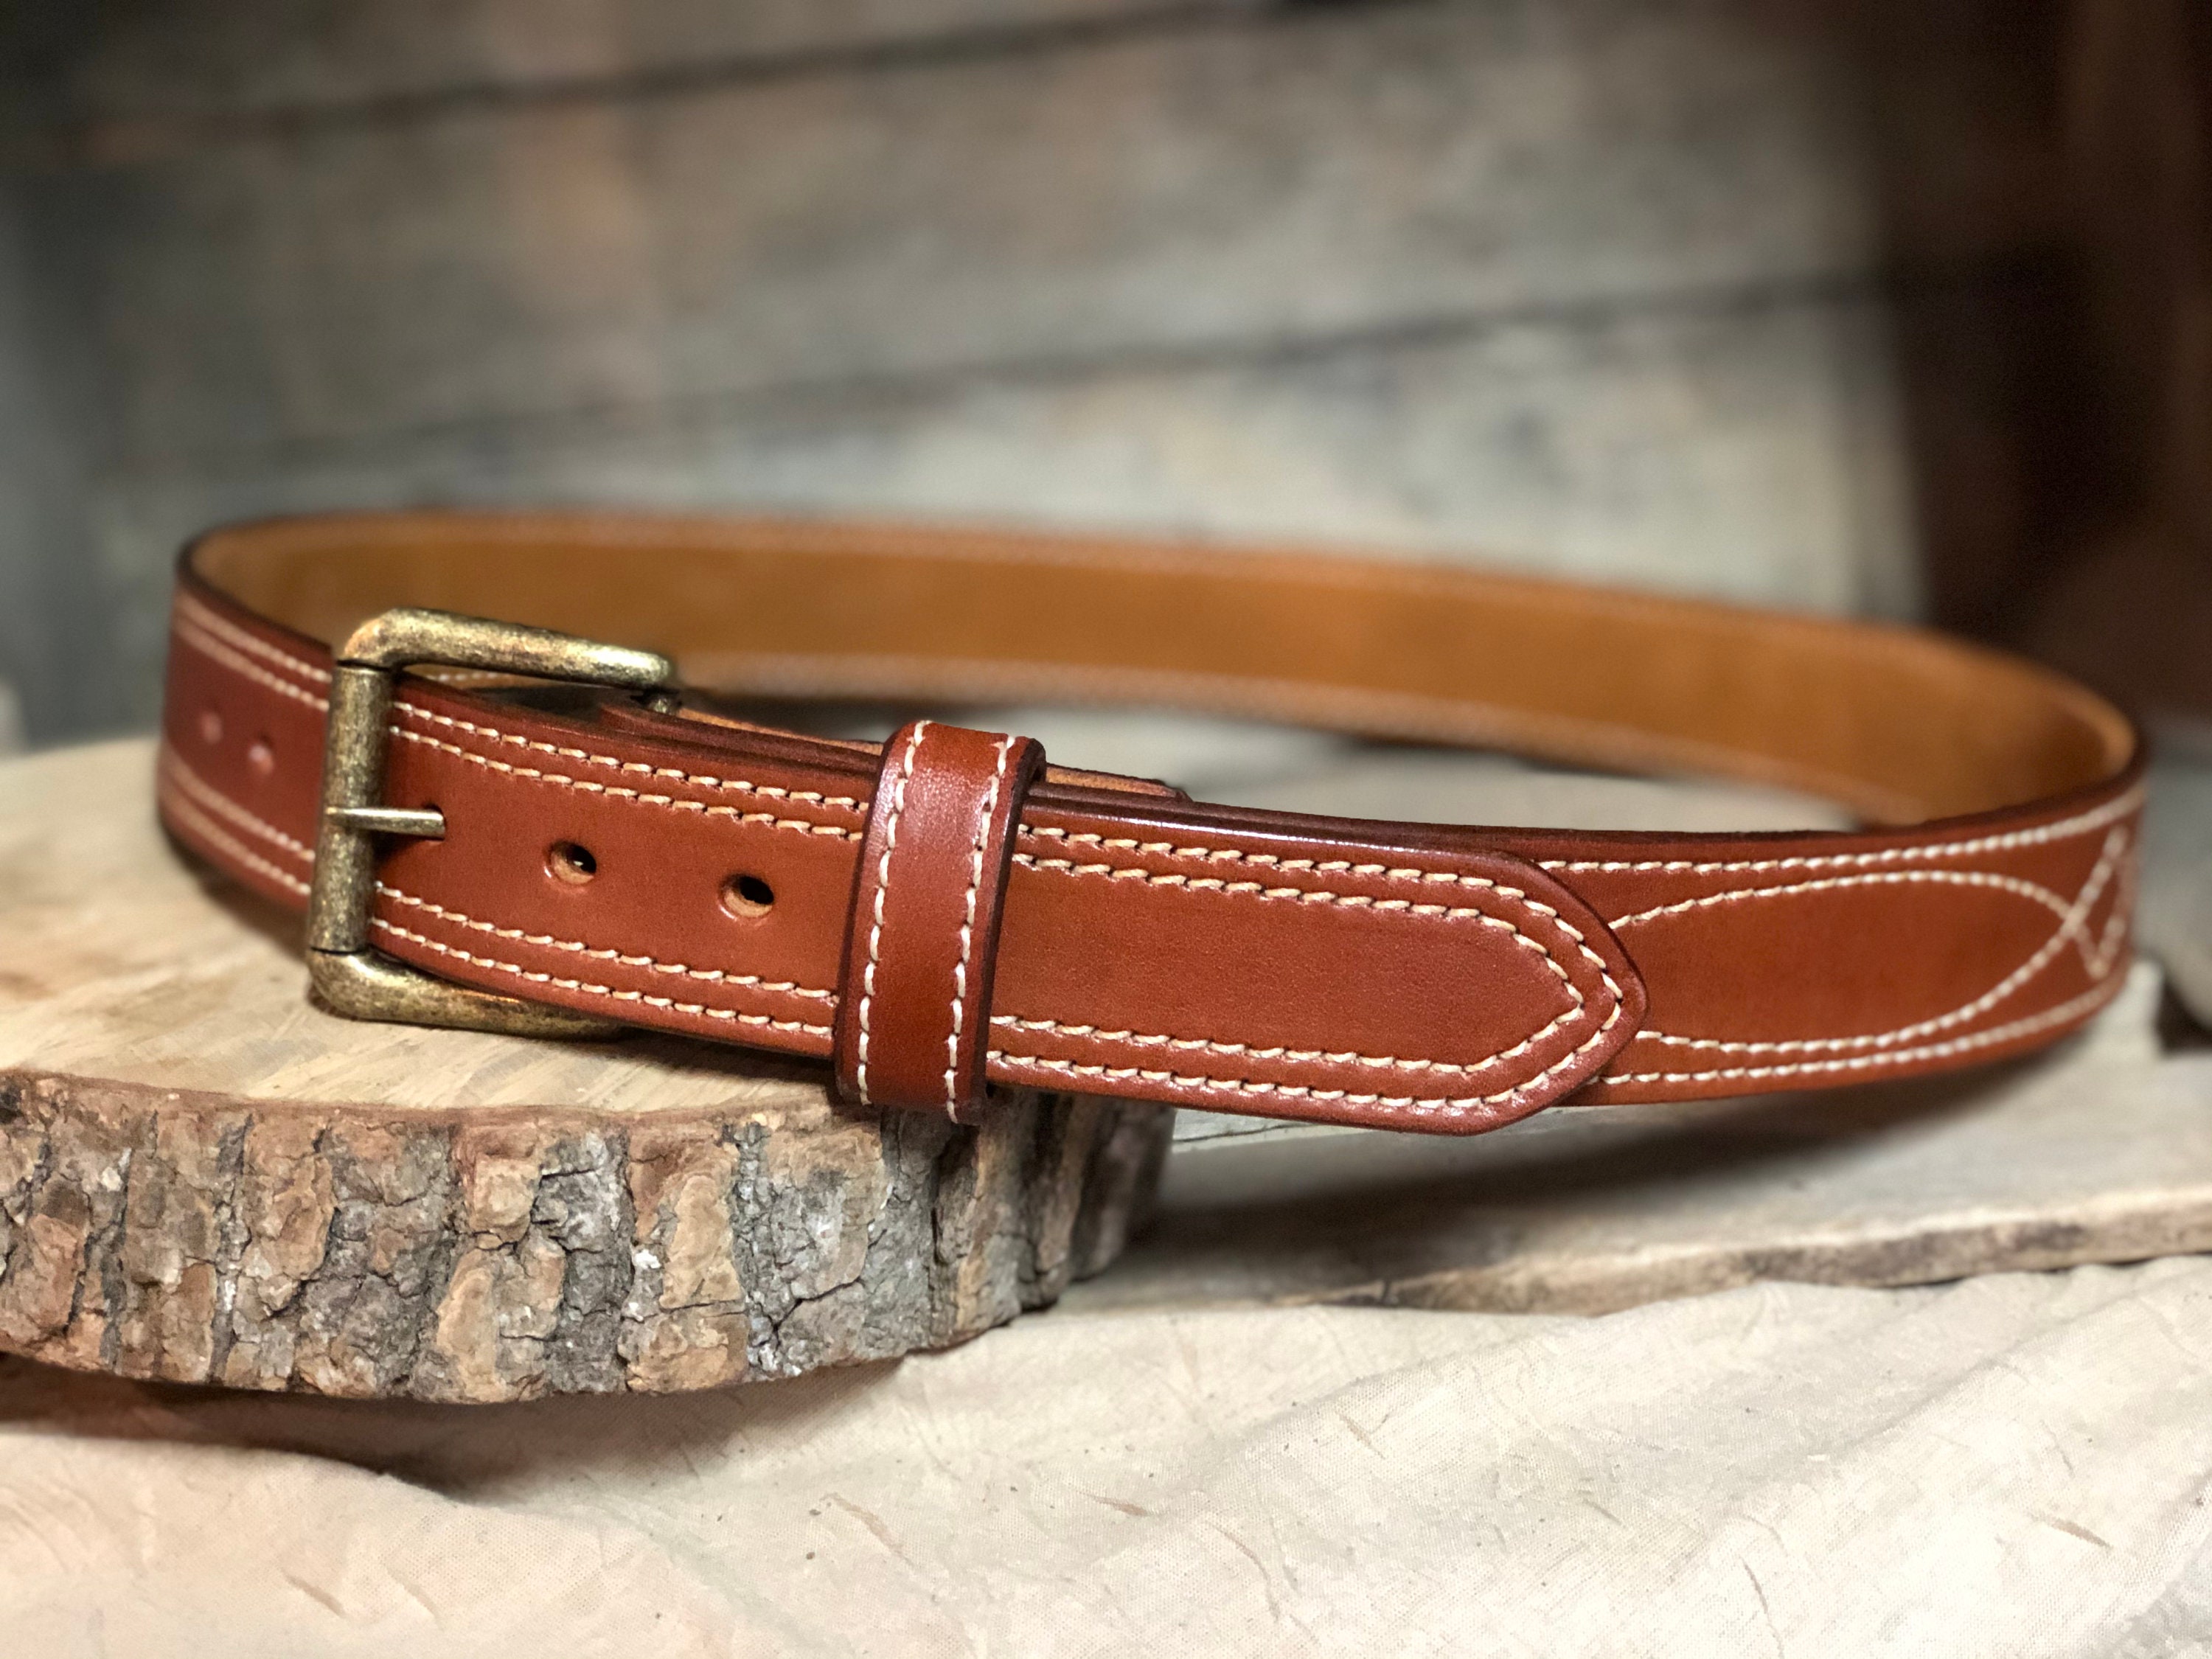 Handmade Double Stitched Leather Belt in Waxed Tan with White Stitching  (order one size larger than the waist)